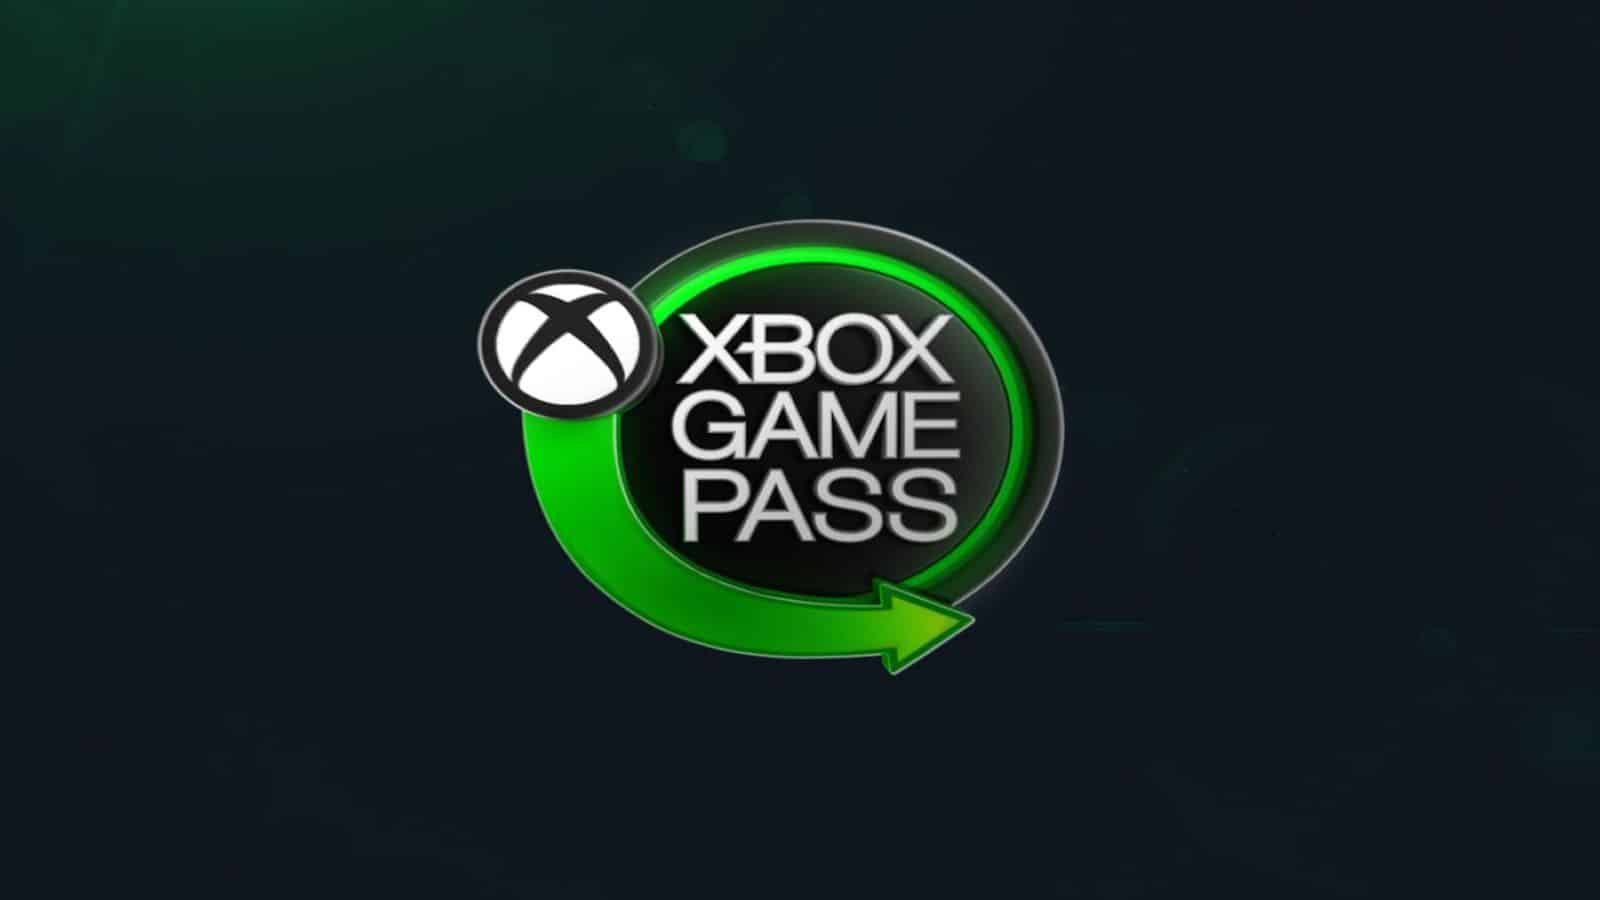 Xbox Game Pass logo on a black background